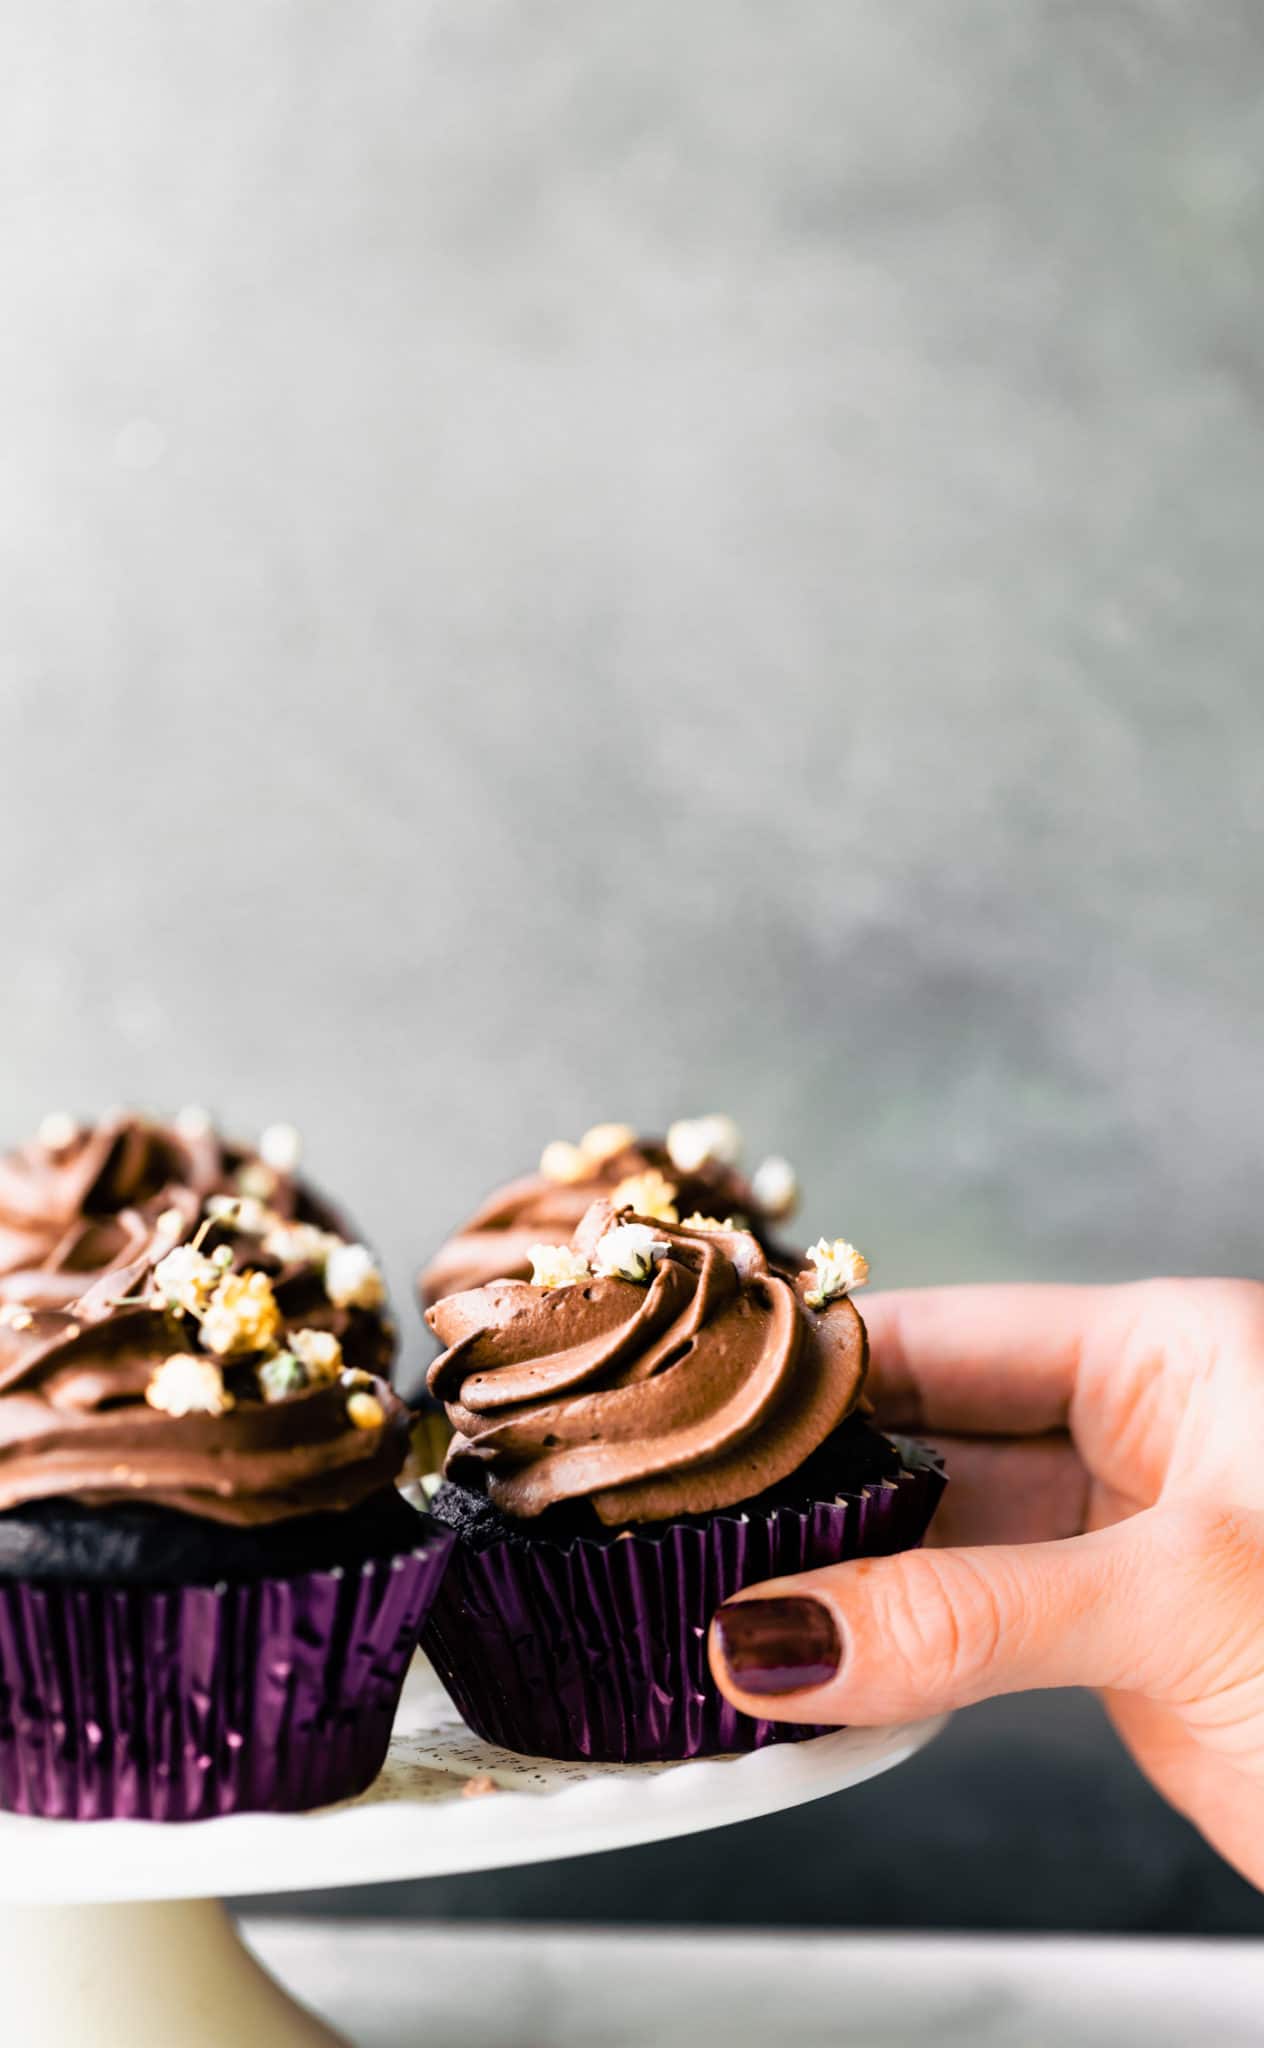 Hand grabbing an egg-free chocolate cupcake with chocolate frosting off a tray